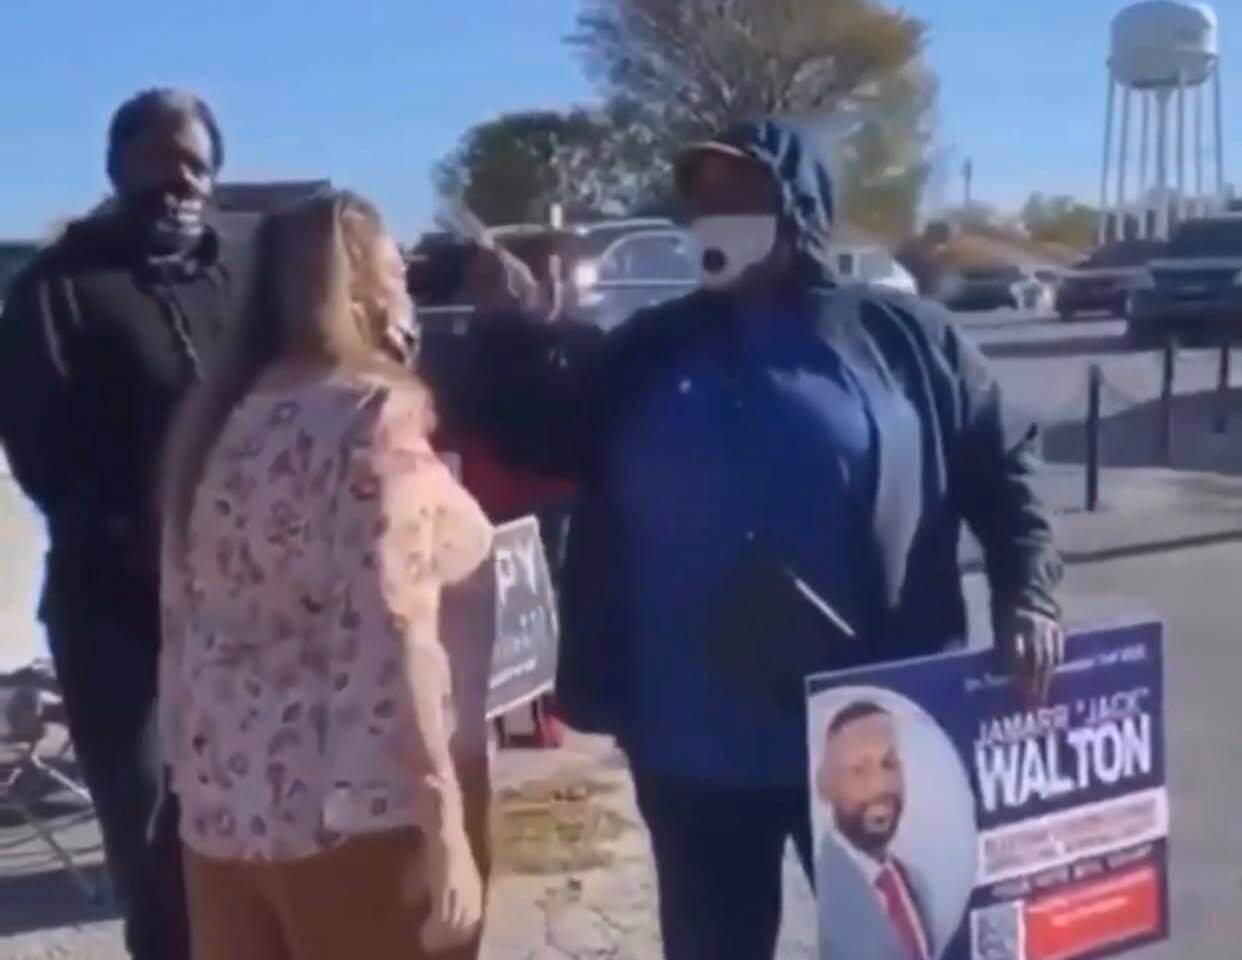 Mississippi Election Commissioner involved in fight with supporters of her opponent near poll on election day (VIDEO)